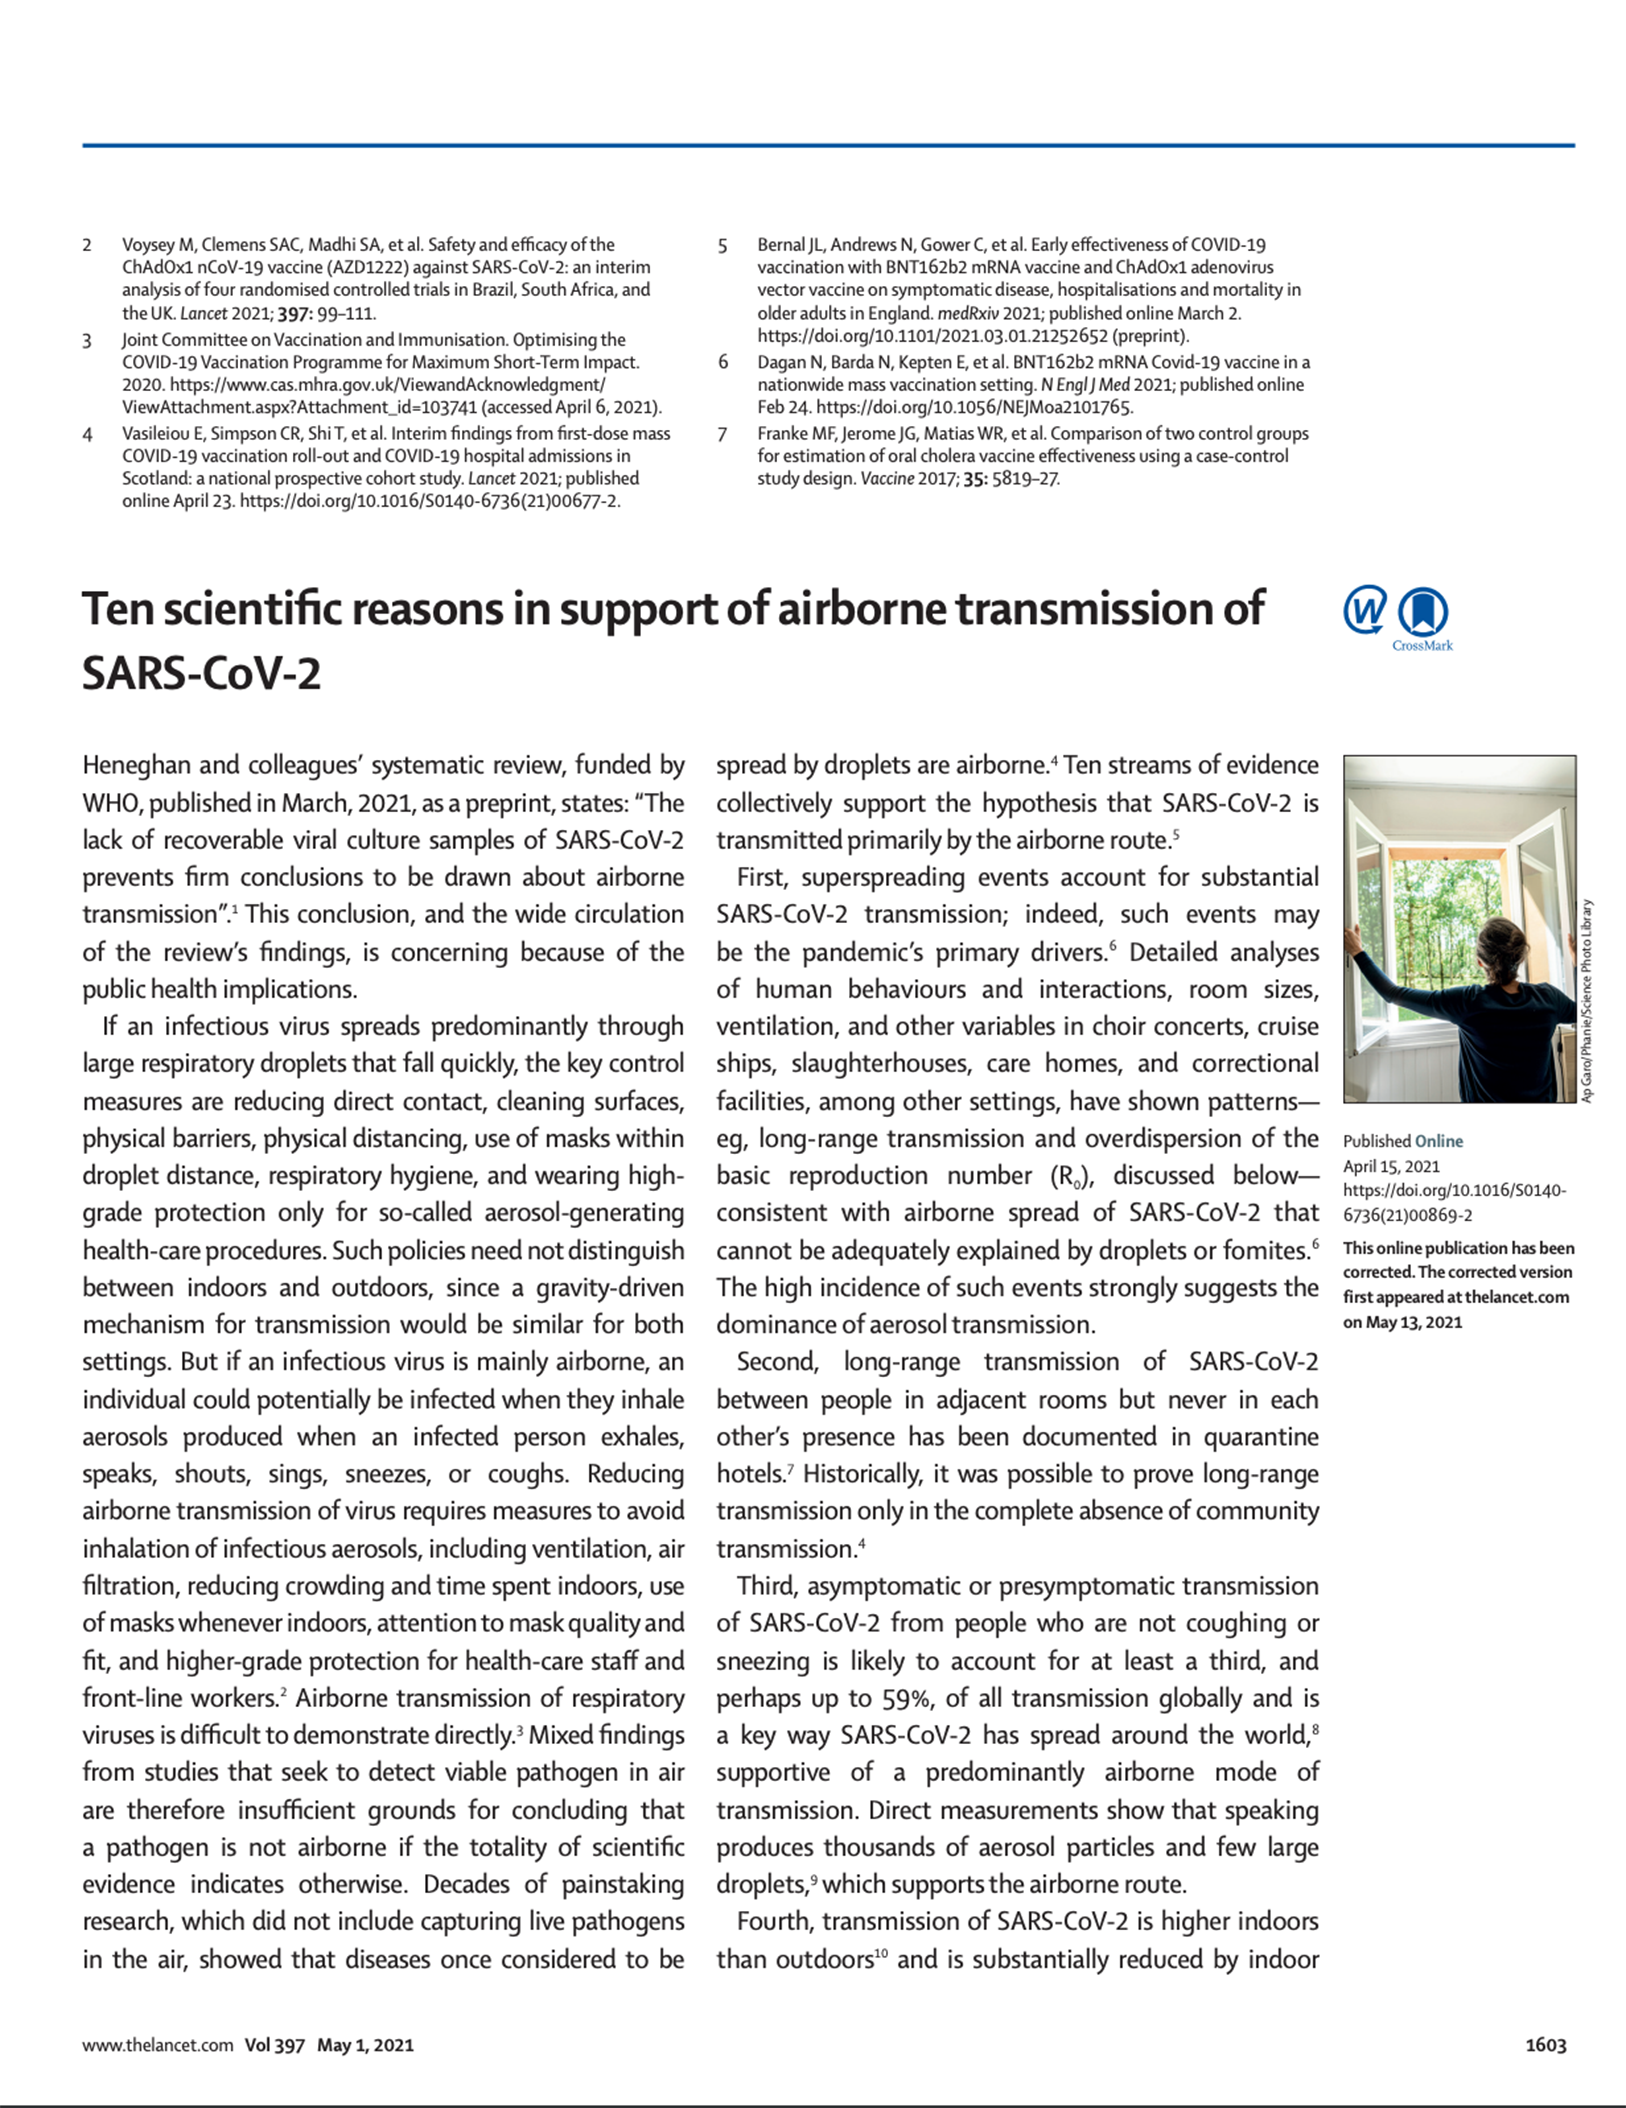 Ten scientific reasons in support of airborne transmission of SARS CoV 2